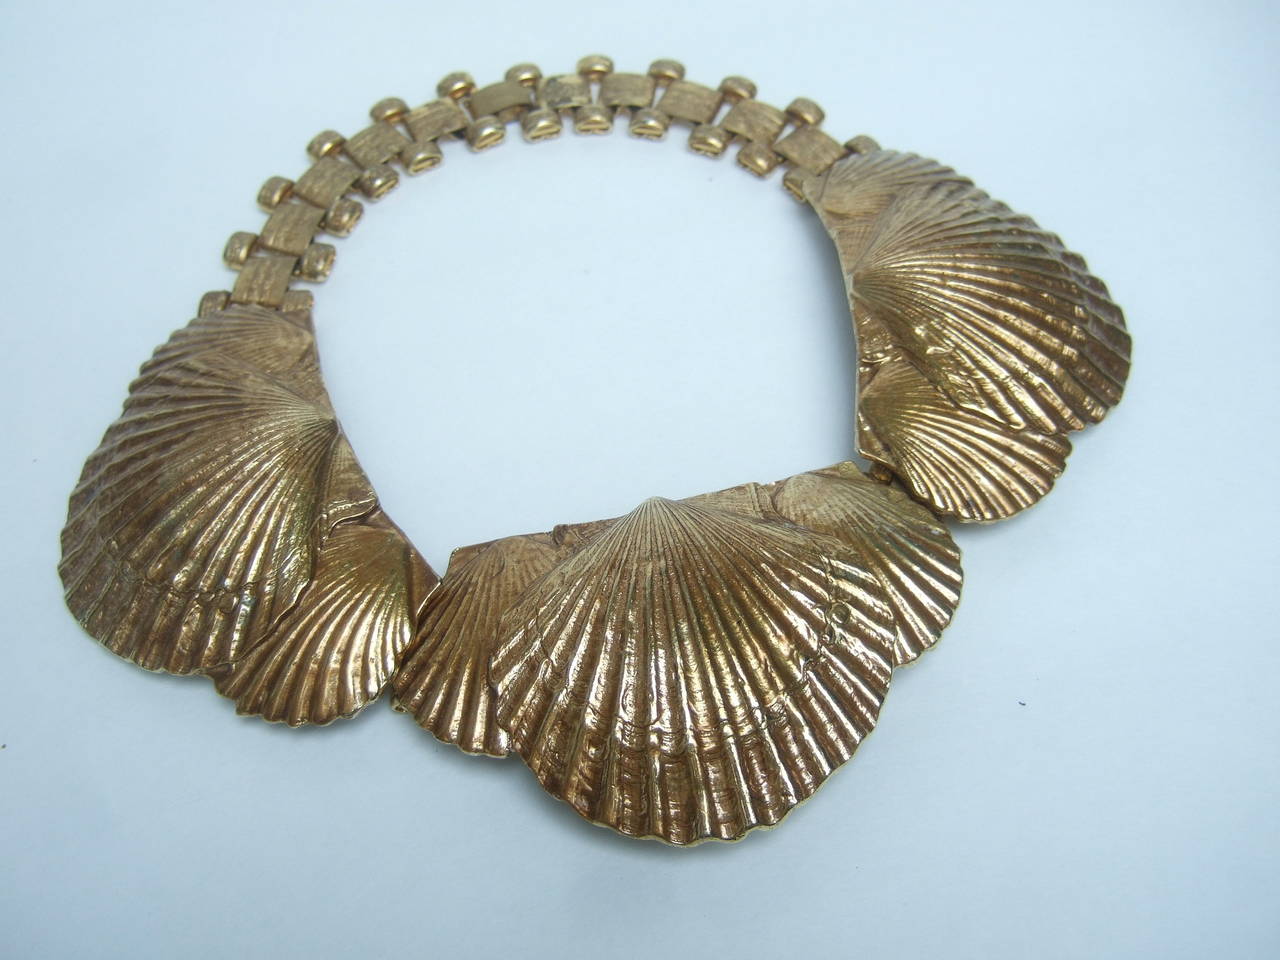 Magnificent Gilt Metal Scallop Shell Choker Necklace Attributed to Line Vautrin  5